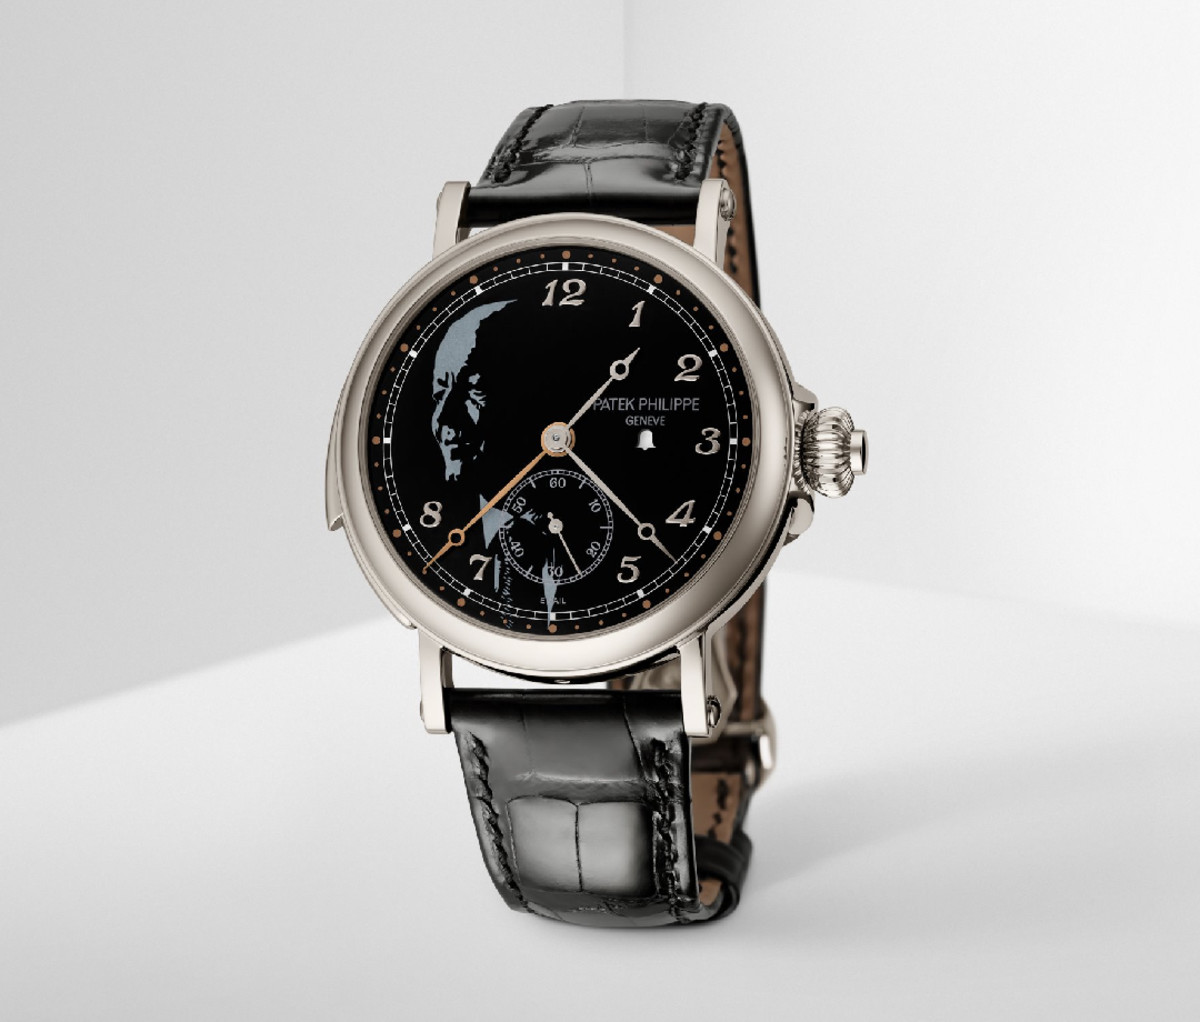 This Classic Patek Philippe Watch Is One of the Brand's Most Limited ...